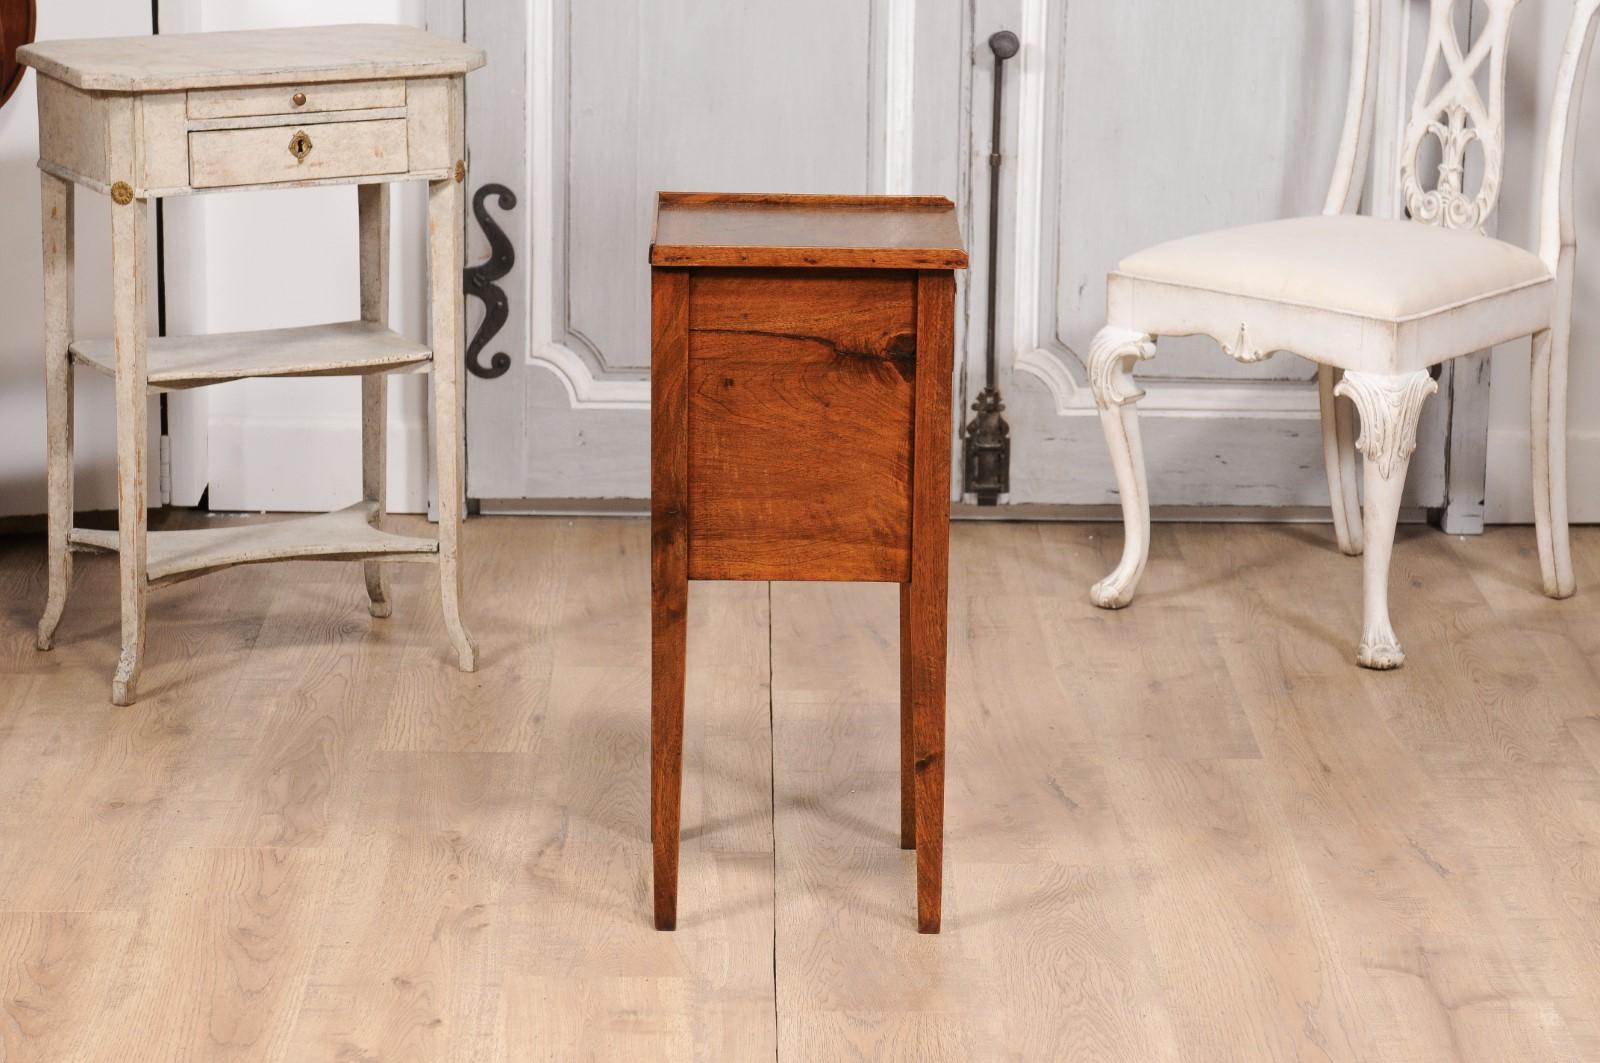 18th Century Italian Walnut Bedside Table with Single Drawer and Tambour Door For Sale 3